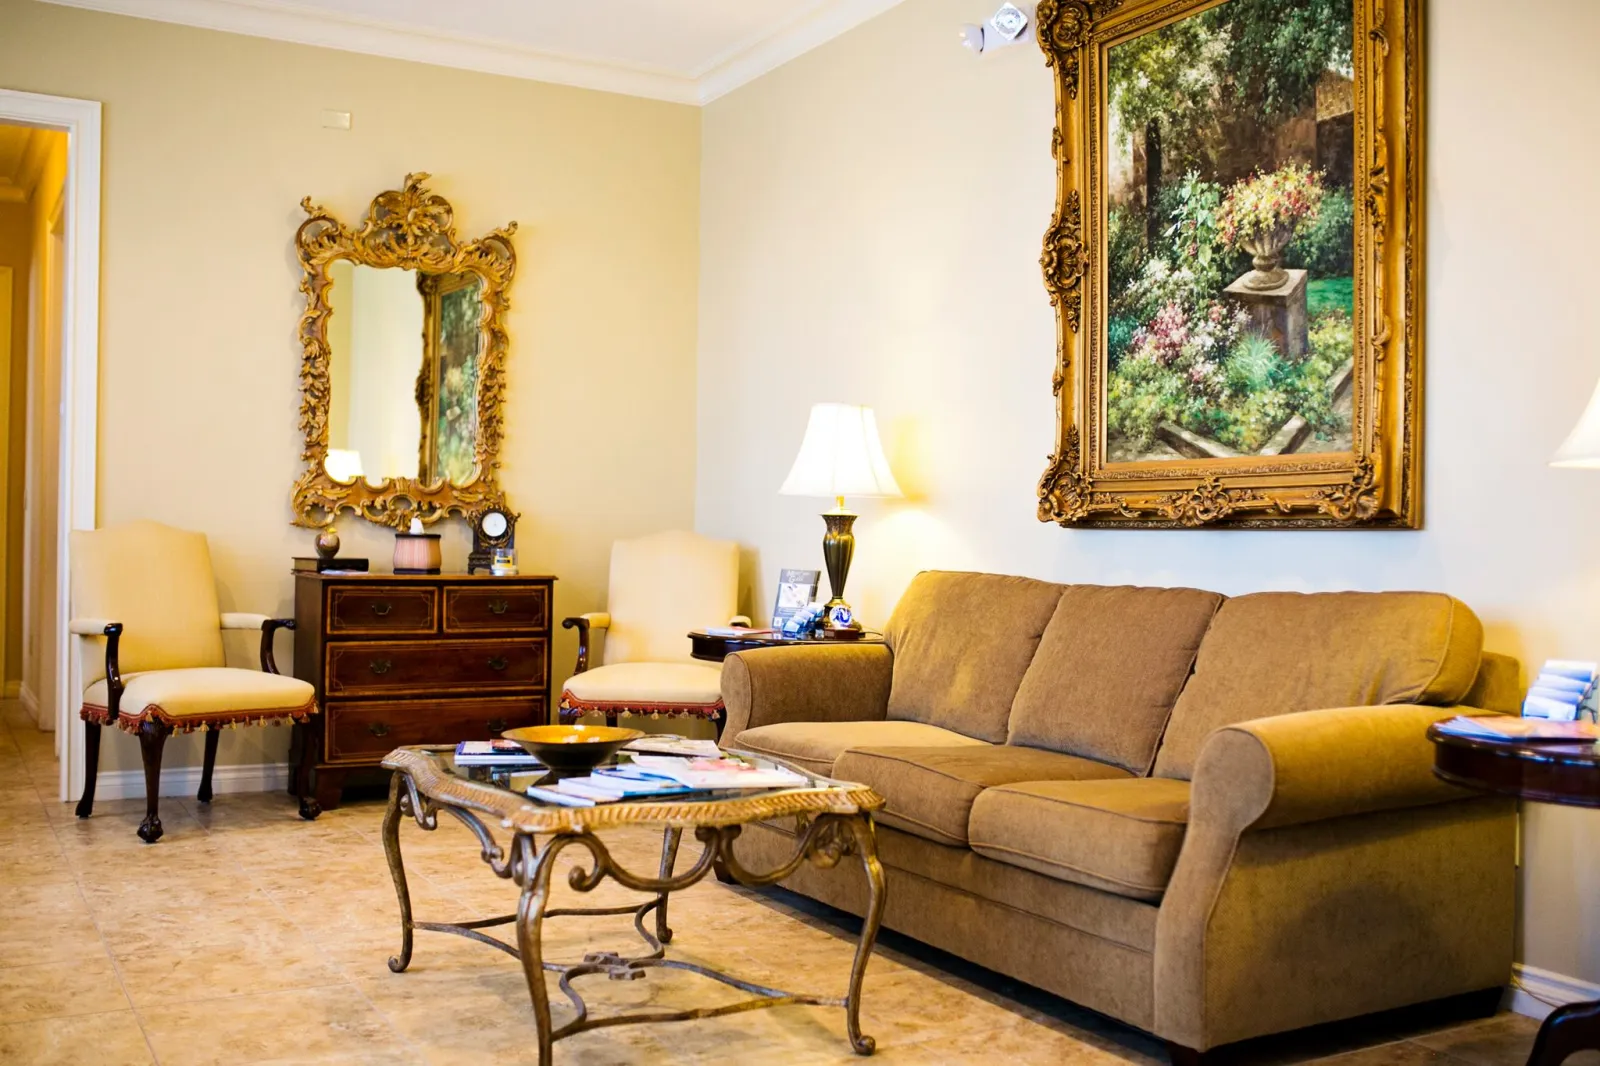 A Sitting Area at Treasure Coast Funeral Home and Crematory in Stuart, Florida 